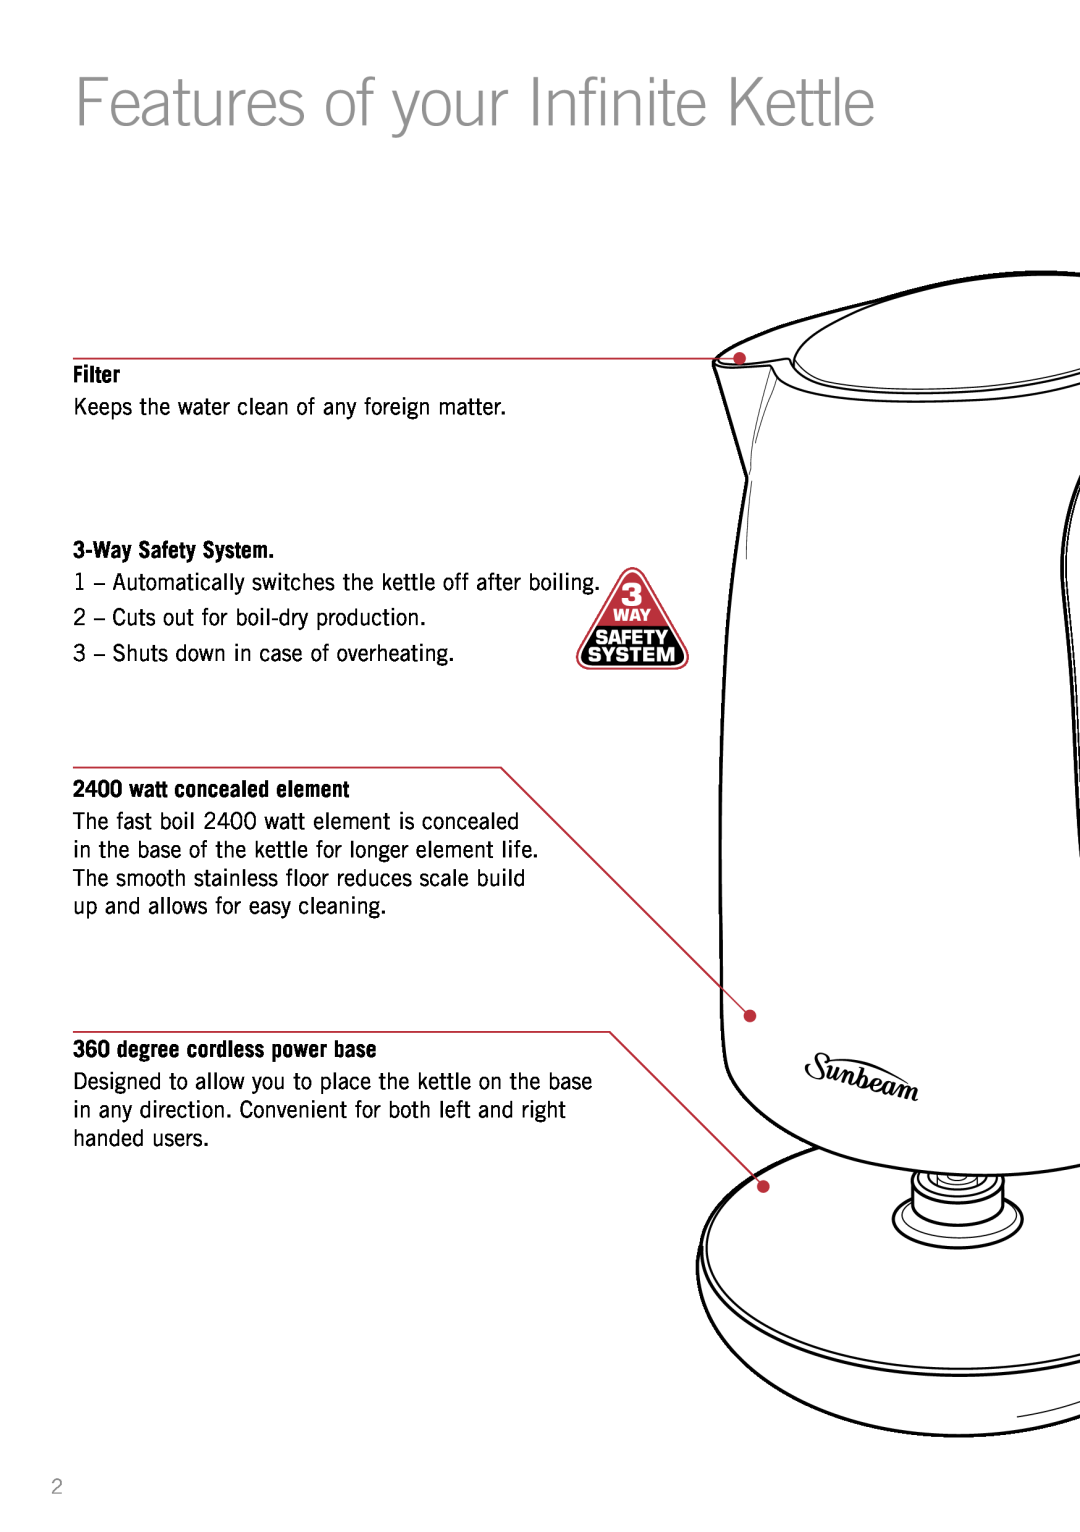 Sunbeam KE2200 manual Features of your Infinite Kettle, Filter, WaySafety System, watt concealed element 